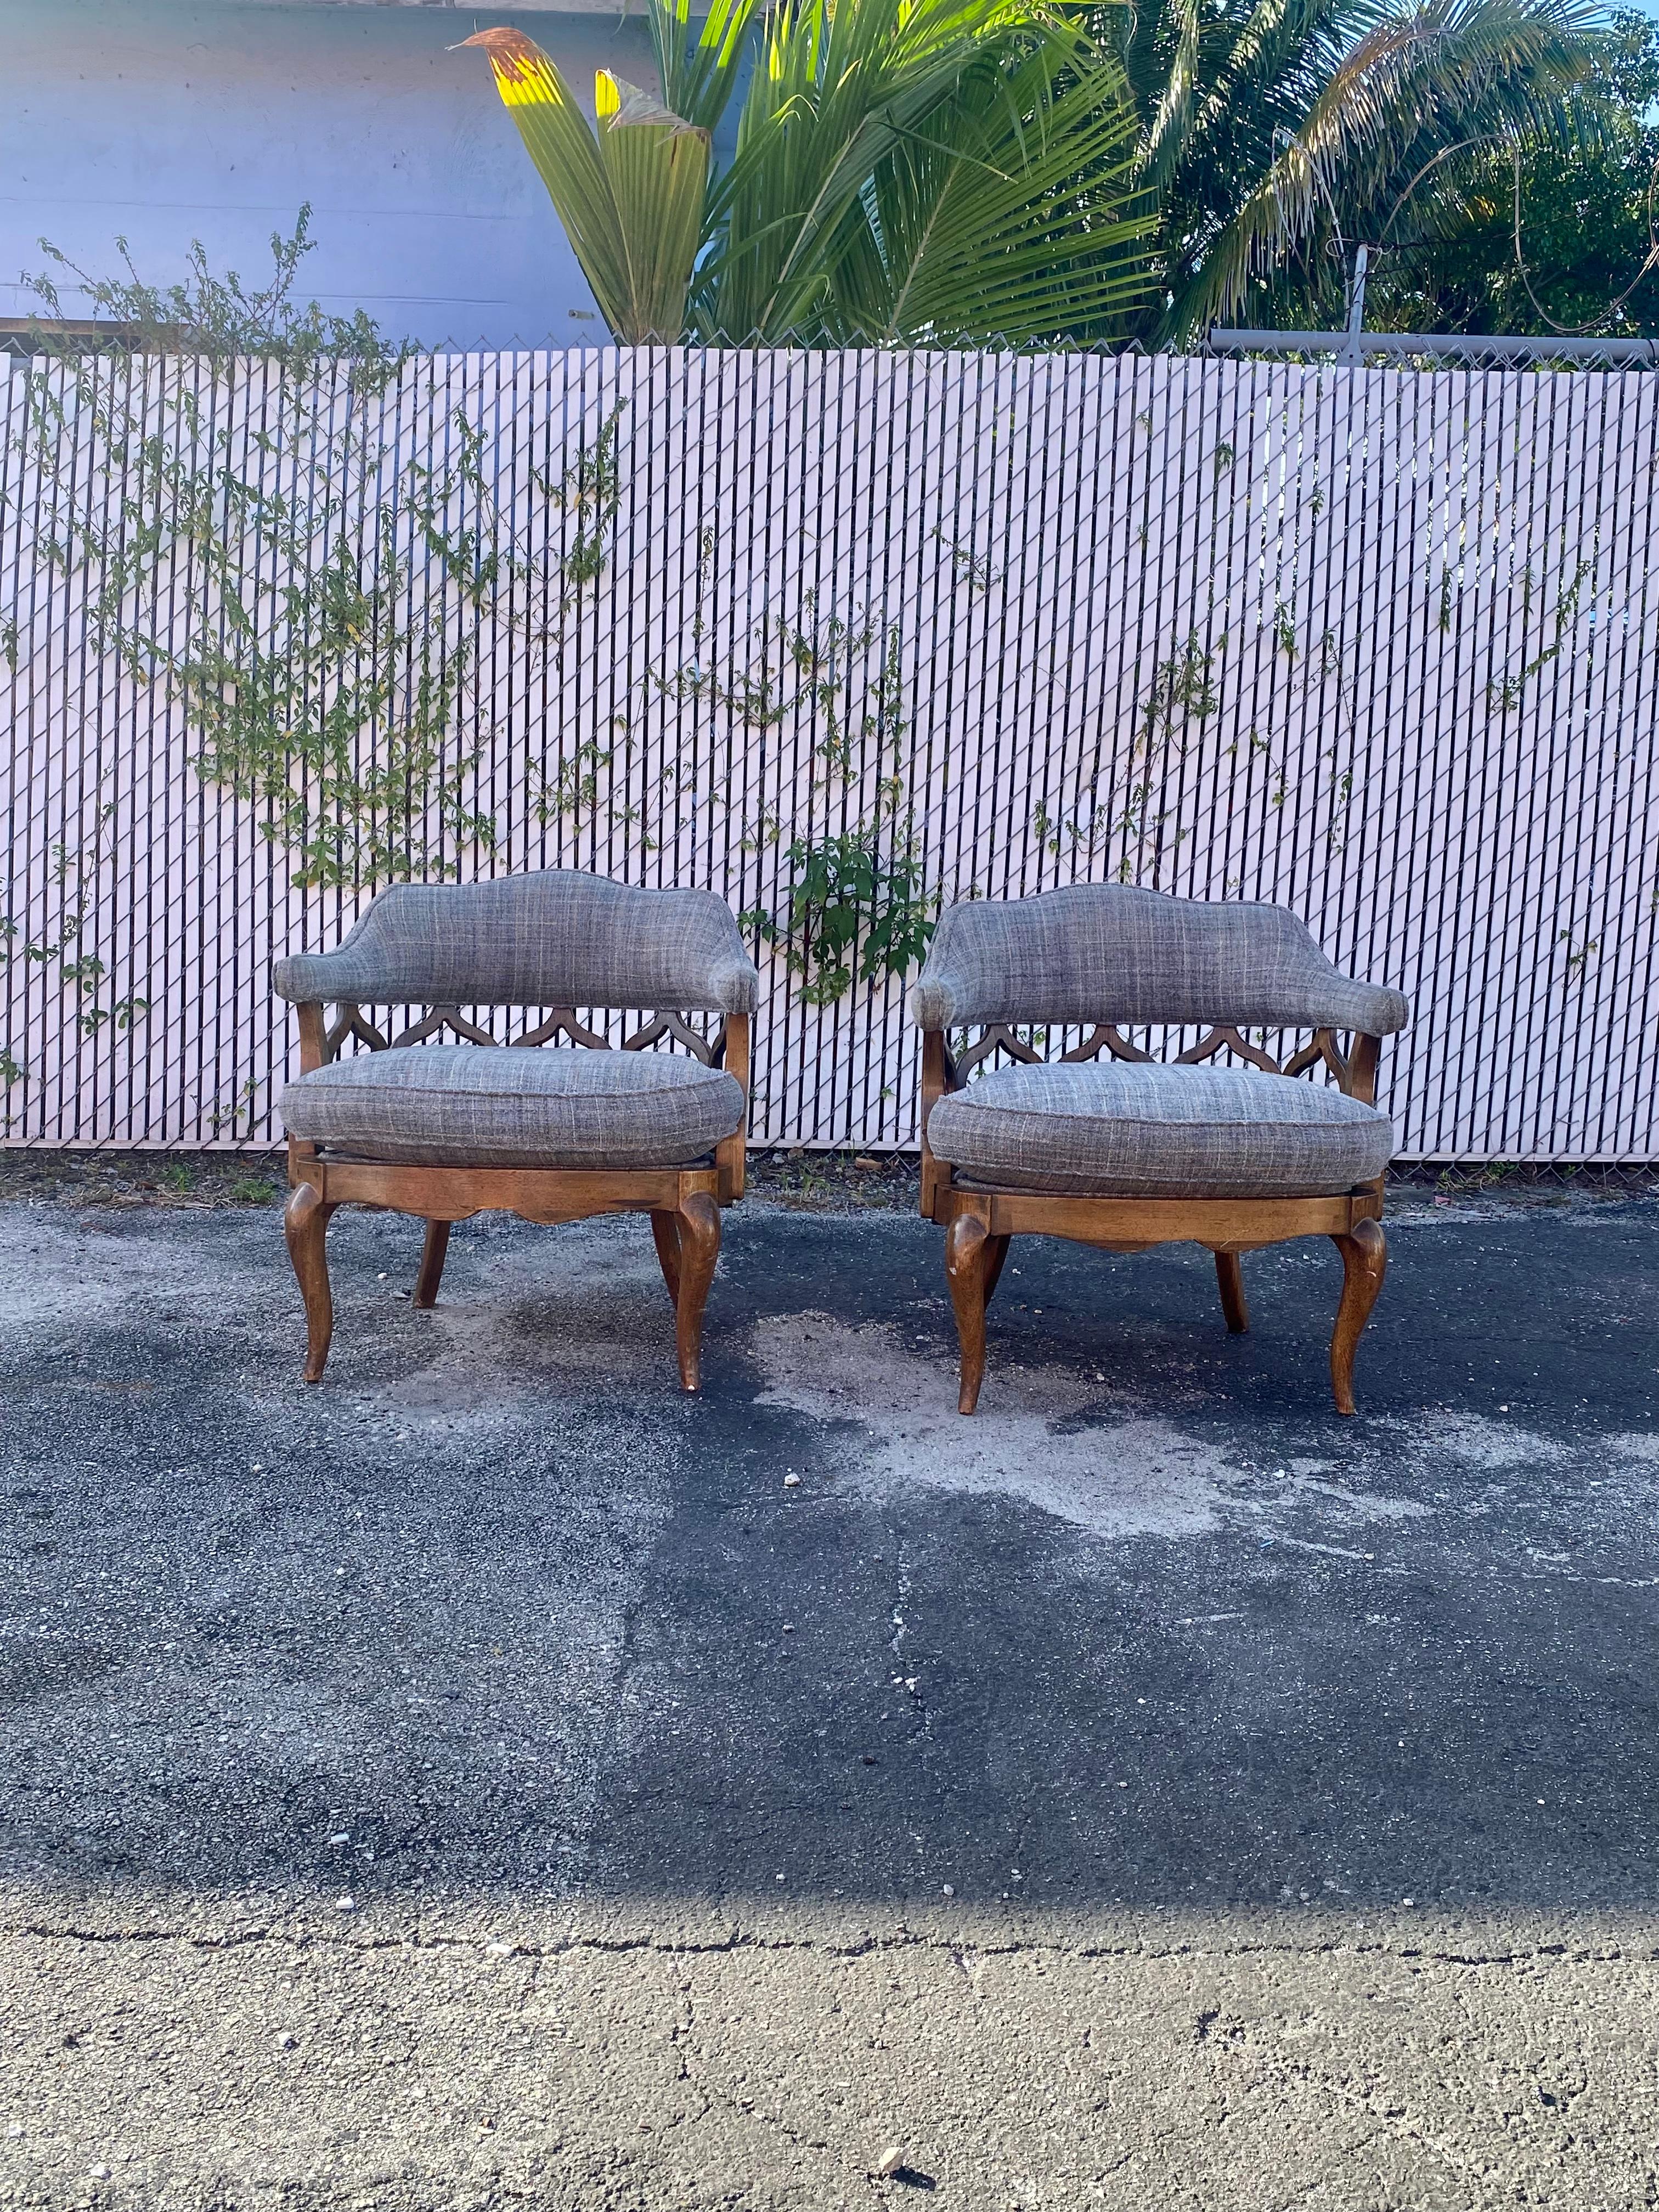 1970s  Mid Century Sculptural Curved Barrel Tweed Wood Chairs, Set of 2 For Sale 6